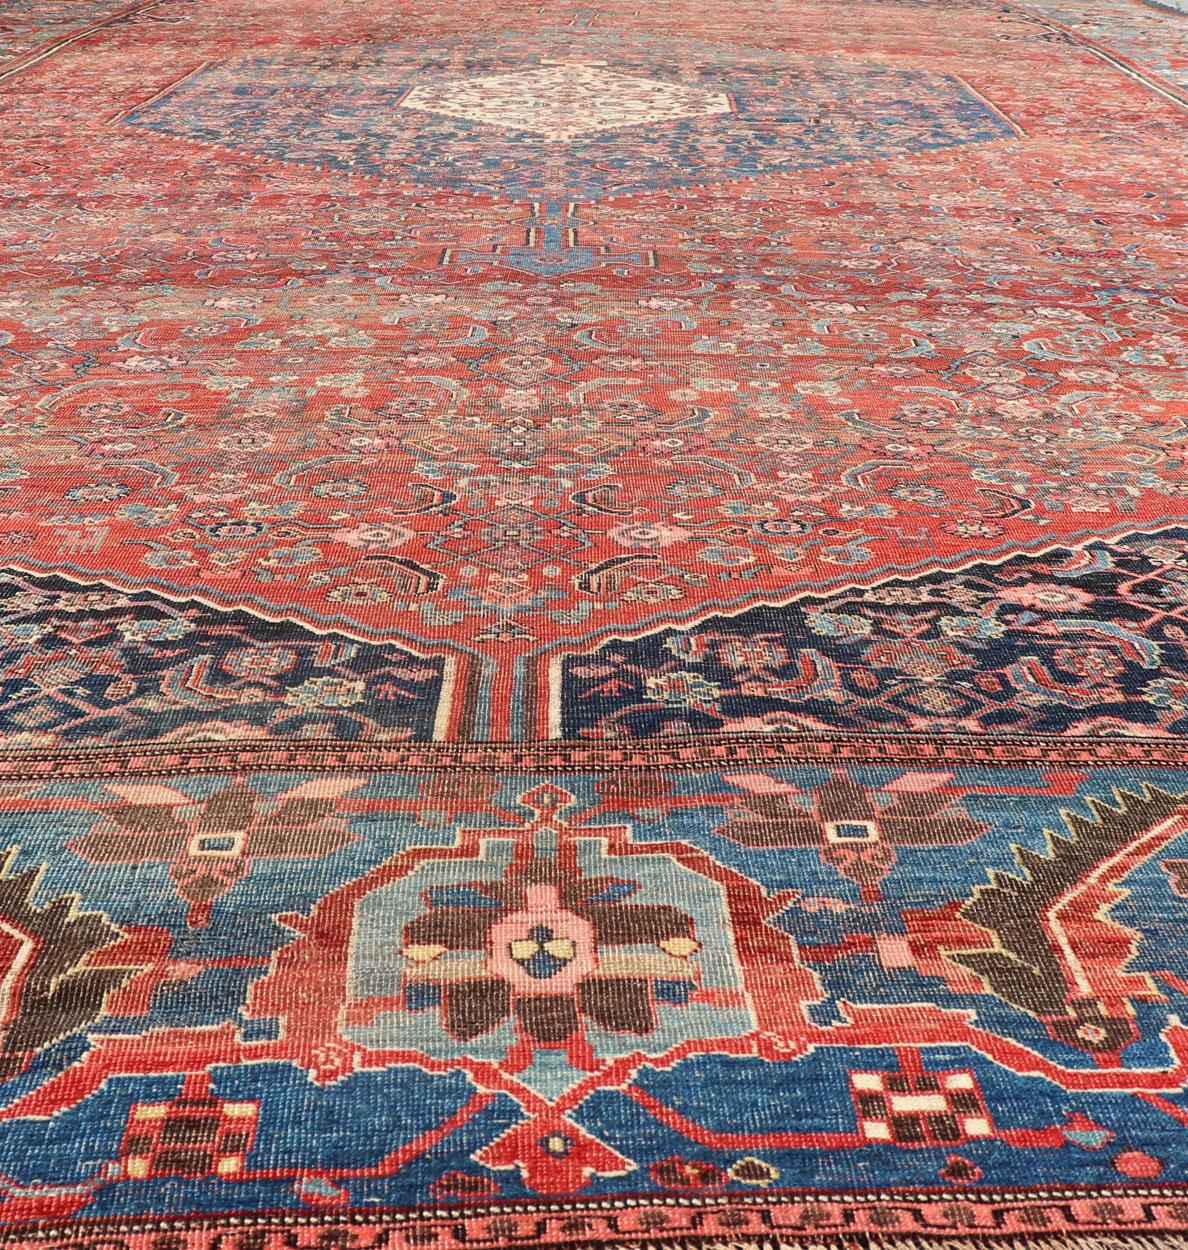 Very Large Antique Persian Bidjar Rug in Multi Shades of Blue, Tera-Cotta & Red For Sale 8